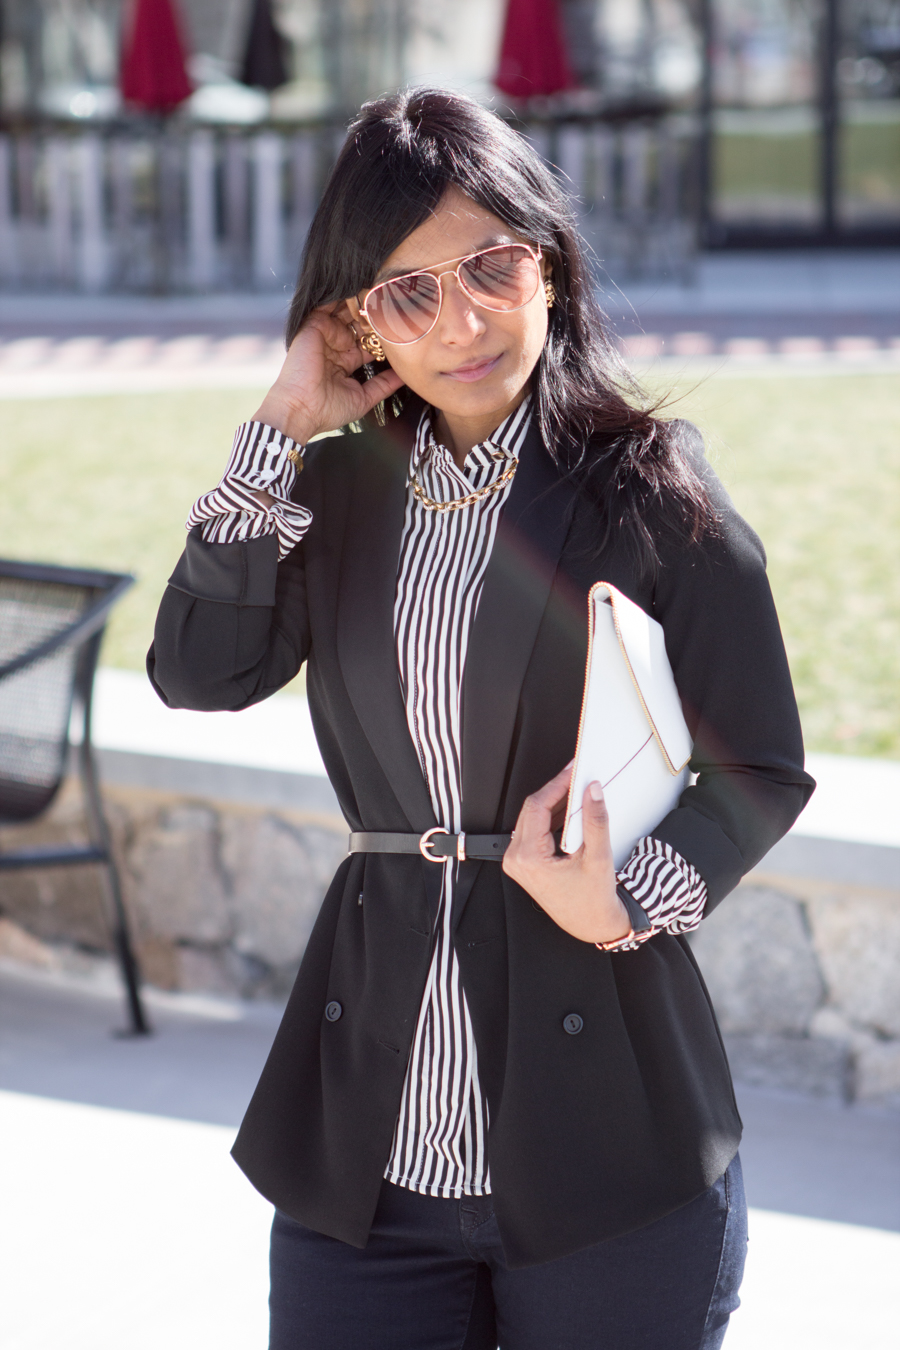 CASUAL FRIDAY: BELTED BLAZER AND DARK JEANS | Petite Style Studio